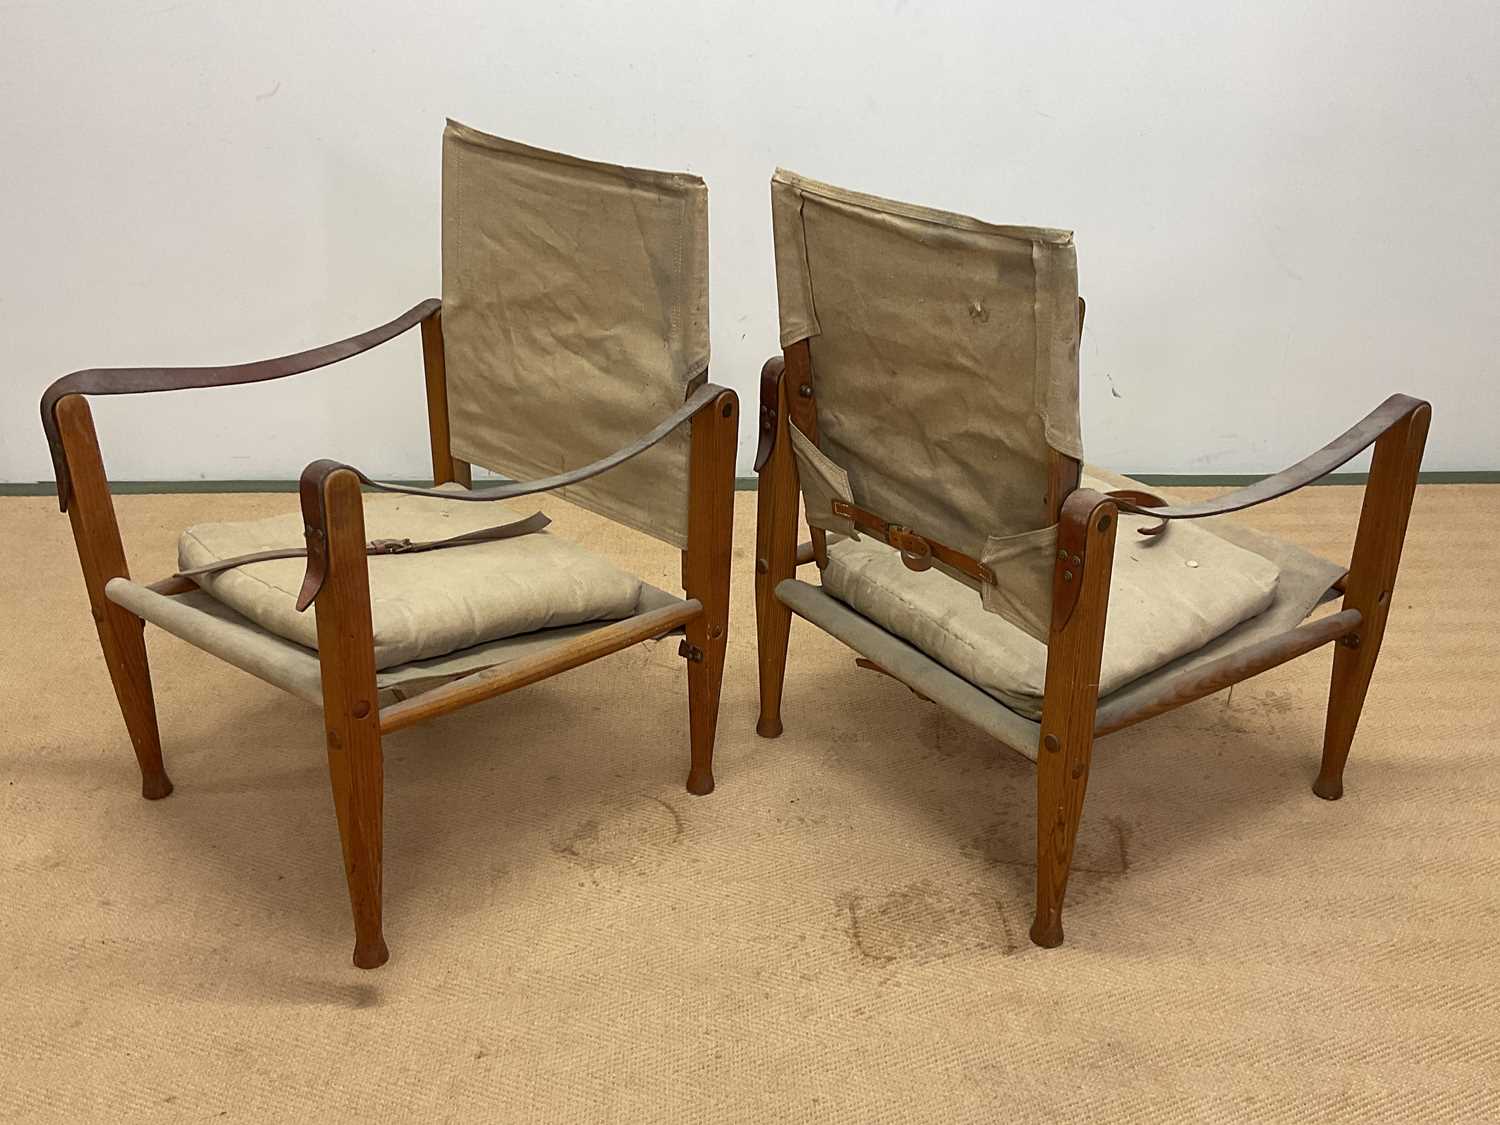 KAARE KLINT FOR CARL HANSEN & SON; a pair of mid 20th century Safari chairs, constructed of canvas - Image 2 of 6